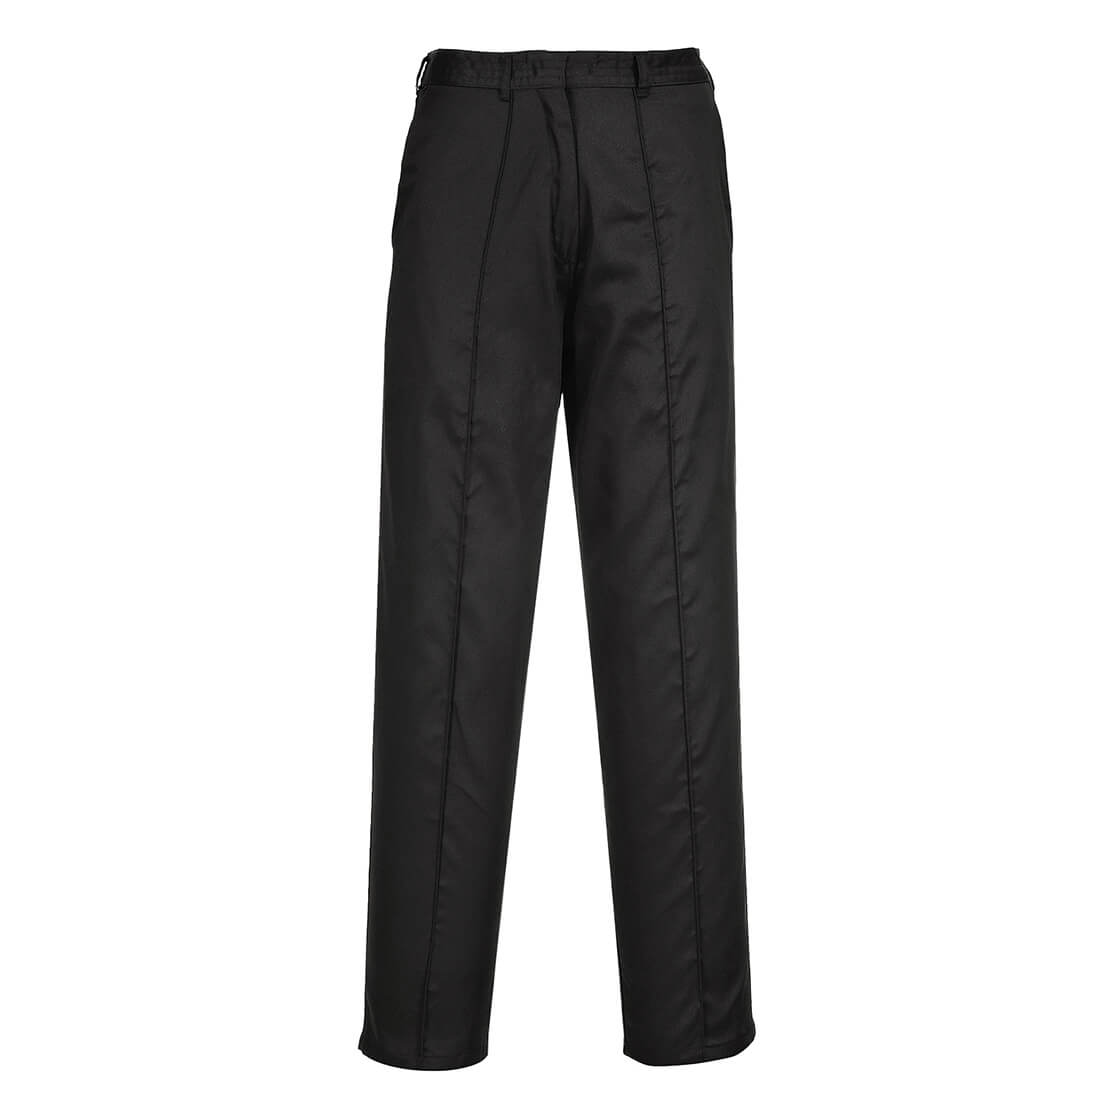 Image of Portwest LW97 ladies Elasticated Trousers Black XL 33"